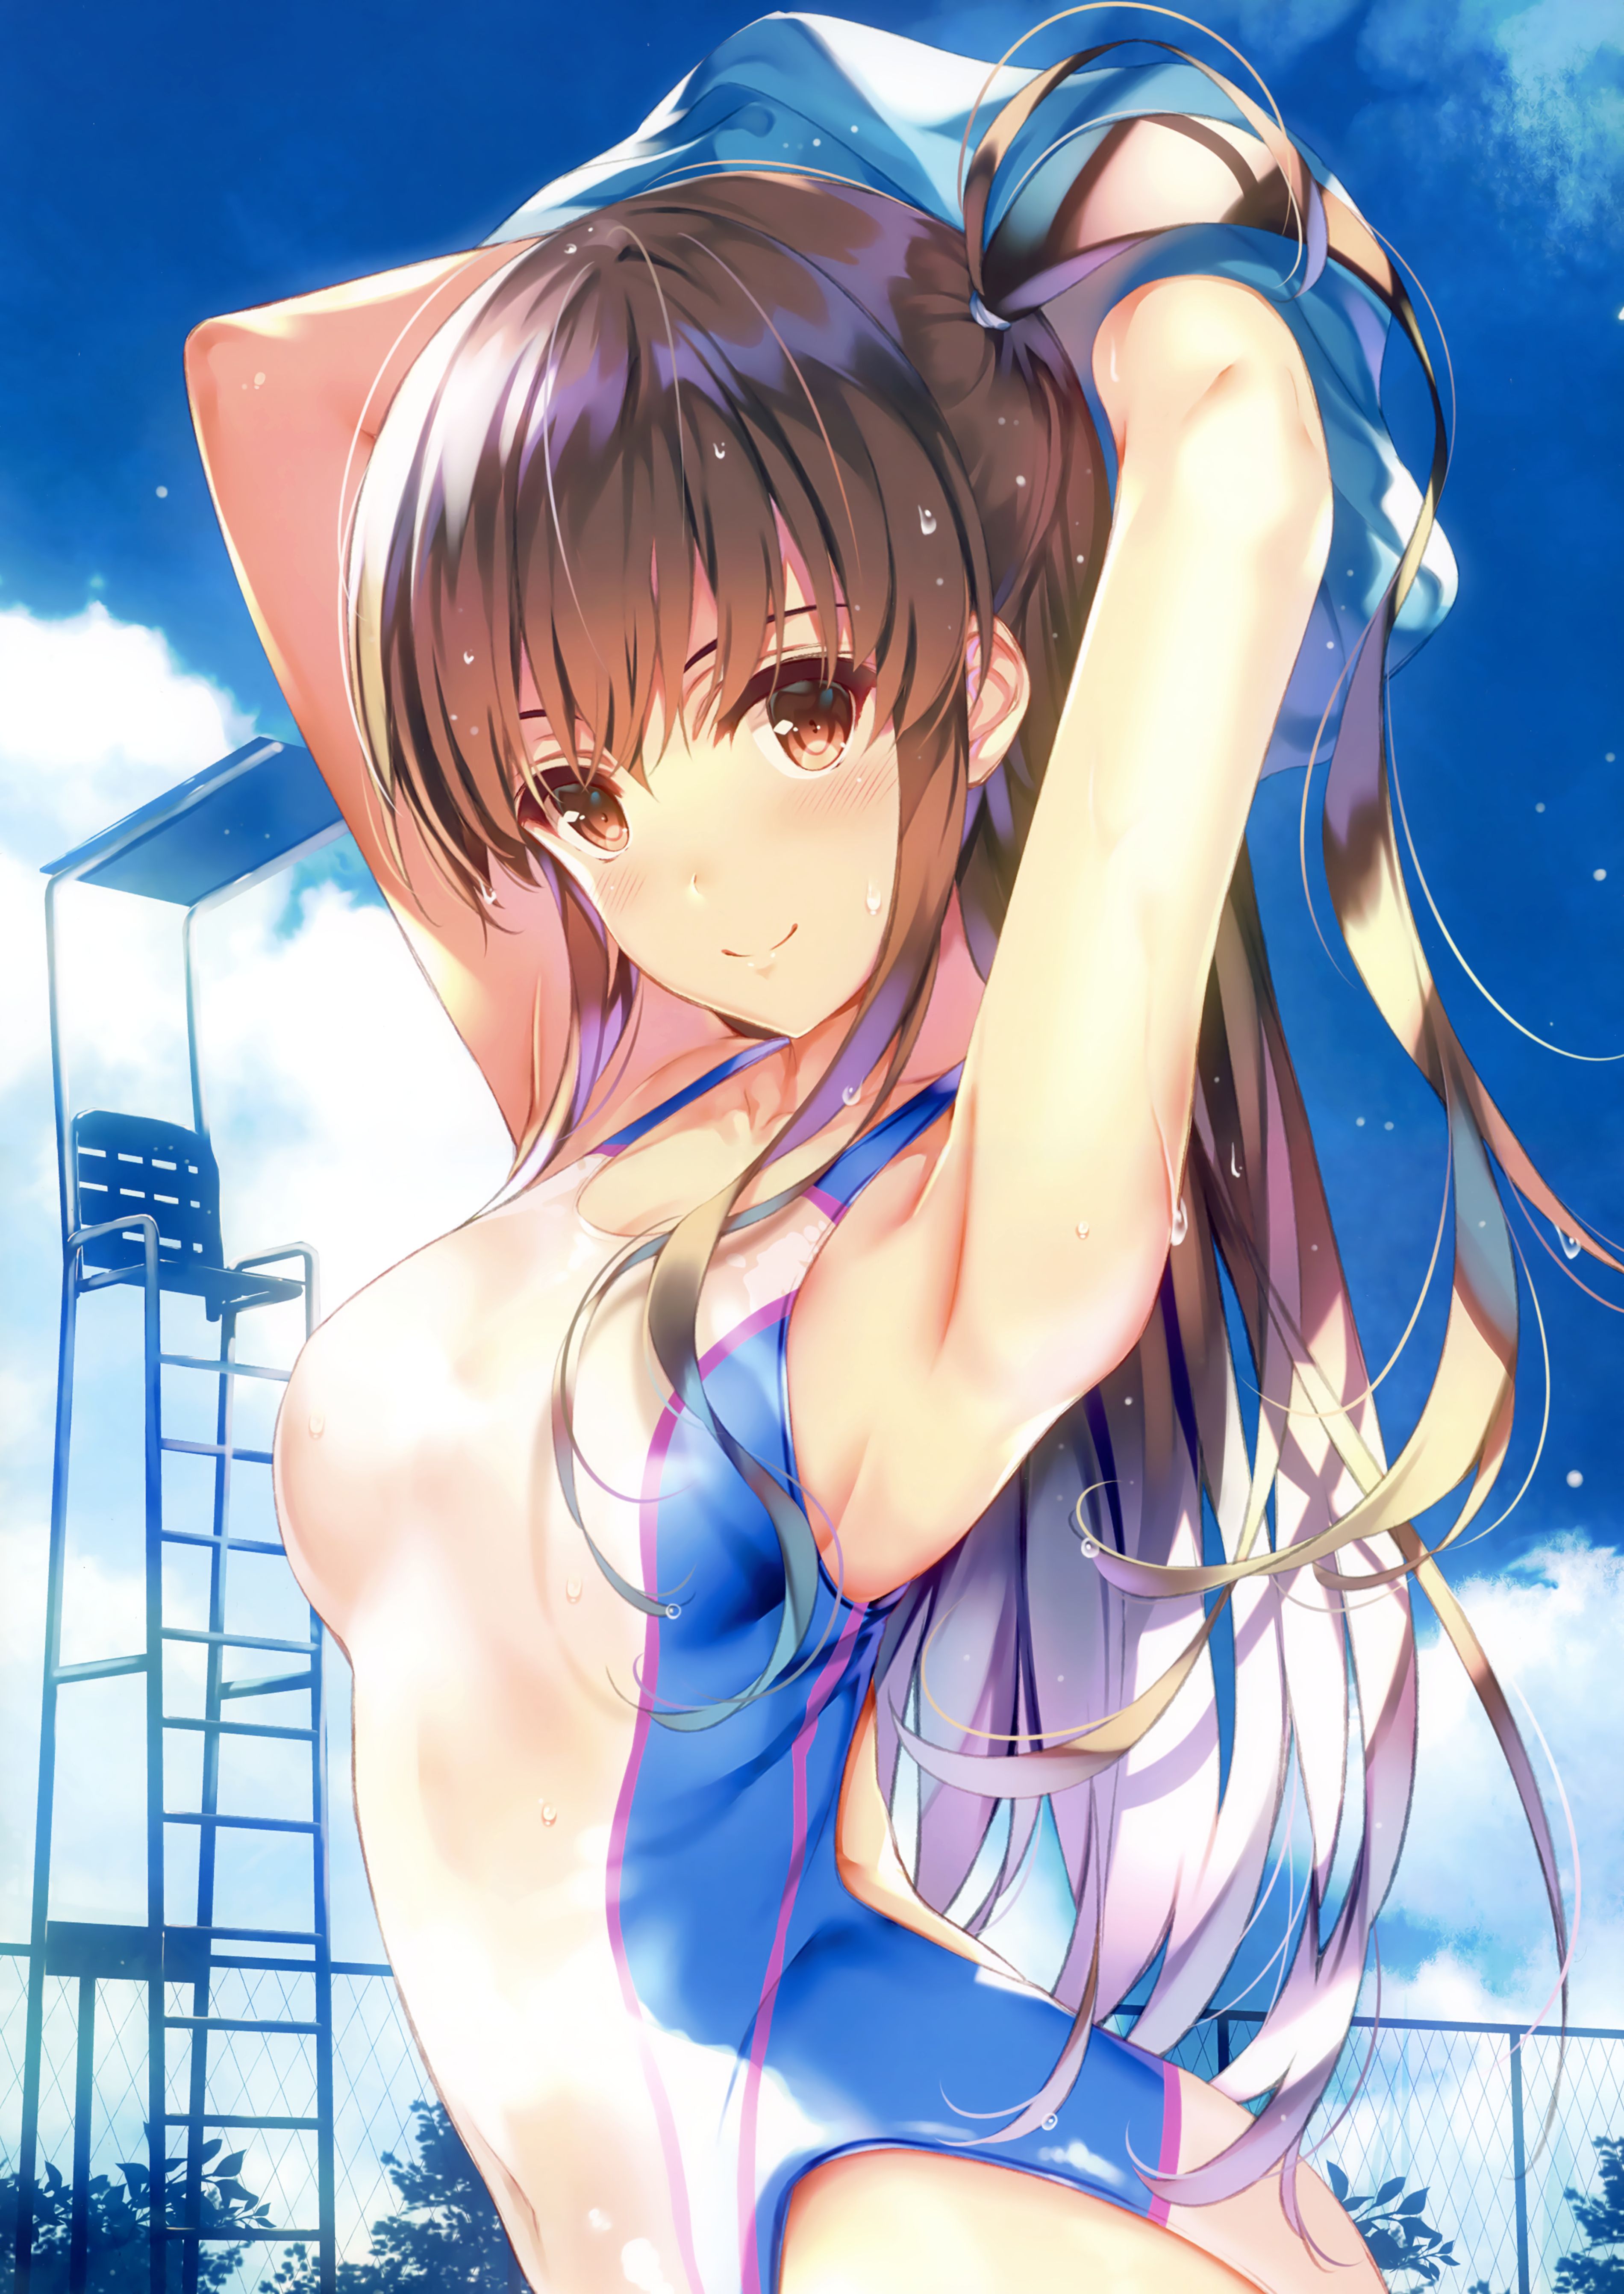 Erotic anime summary Erotic image collection of wet transparent beauties and beautiful girls that are variously transparent [50 sheets] 34